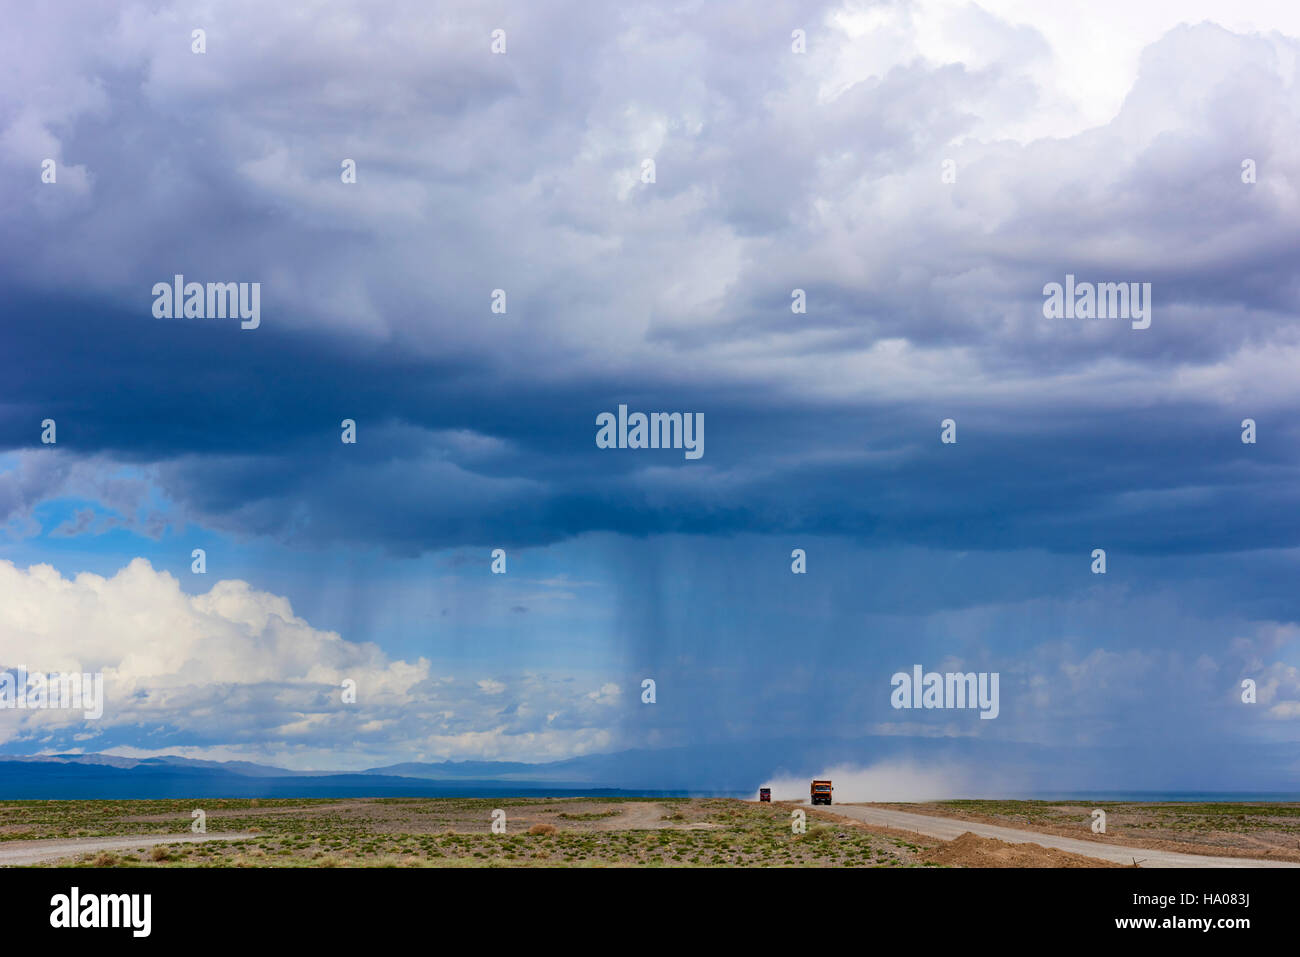 Mongolia, Gobi-Altay province, western Mongolia, landscape in the steppe Stock Photo